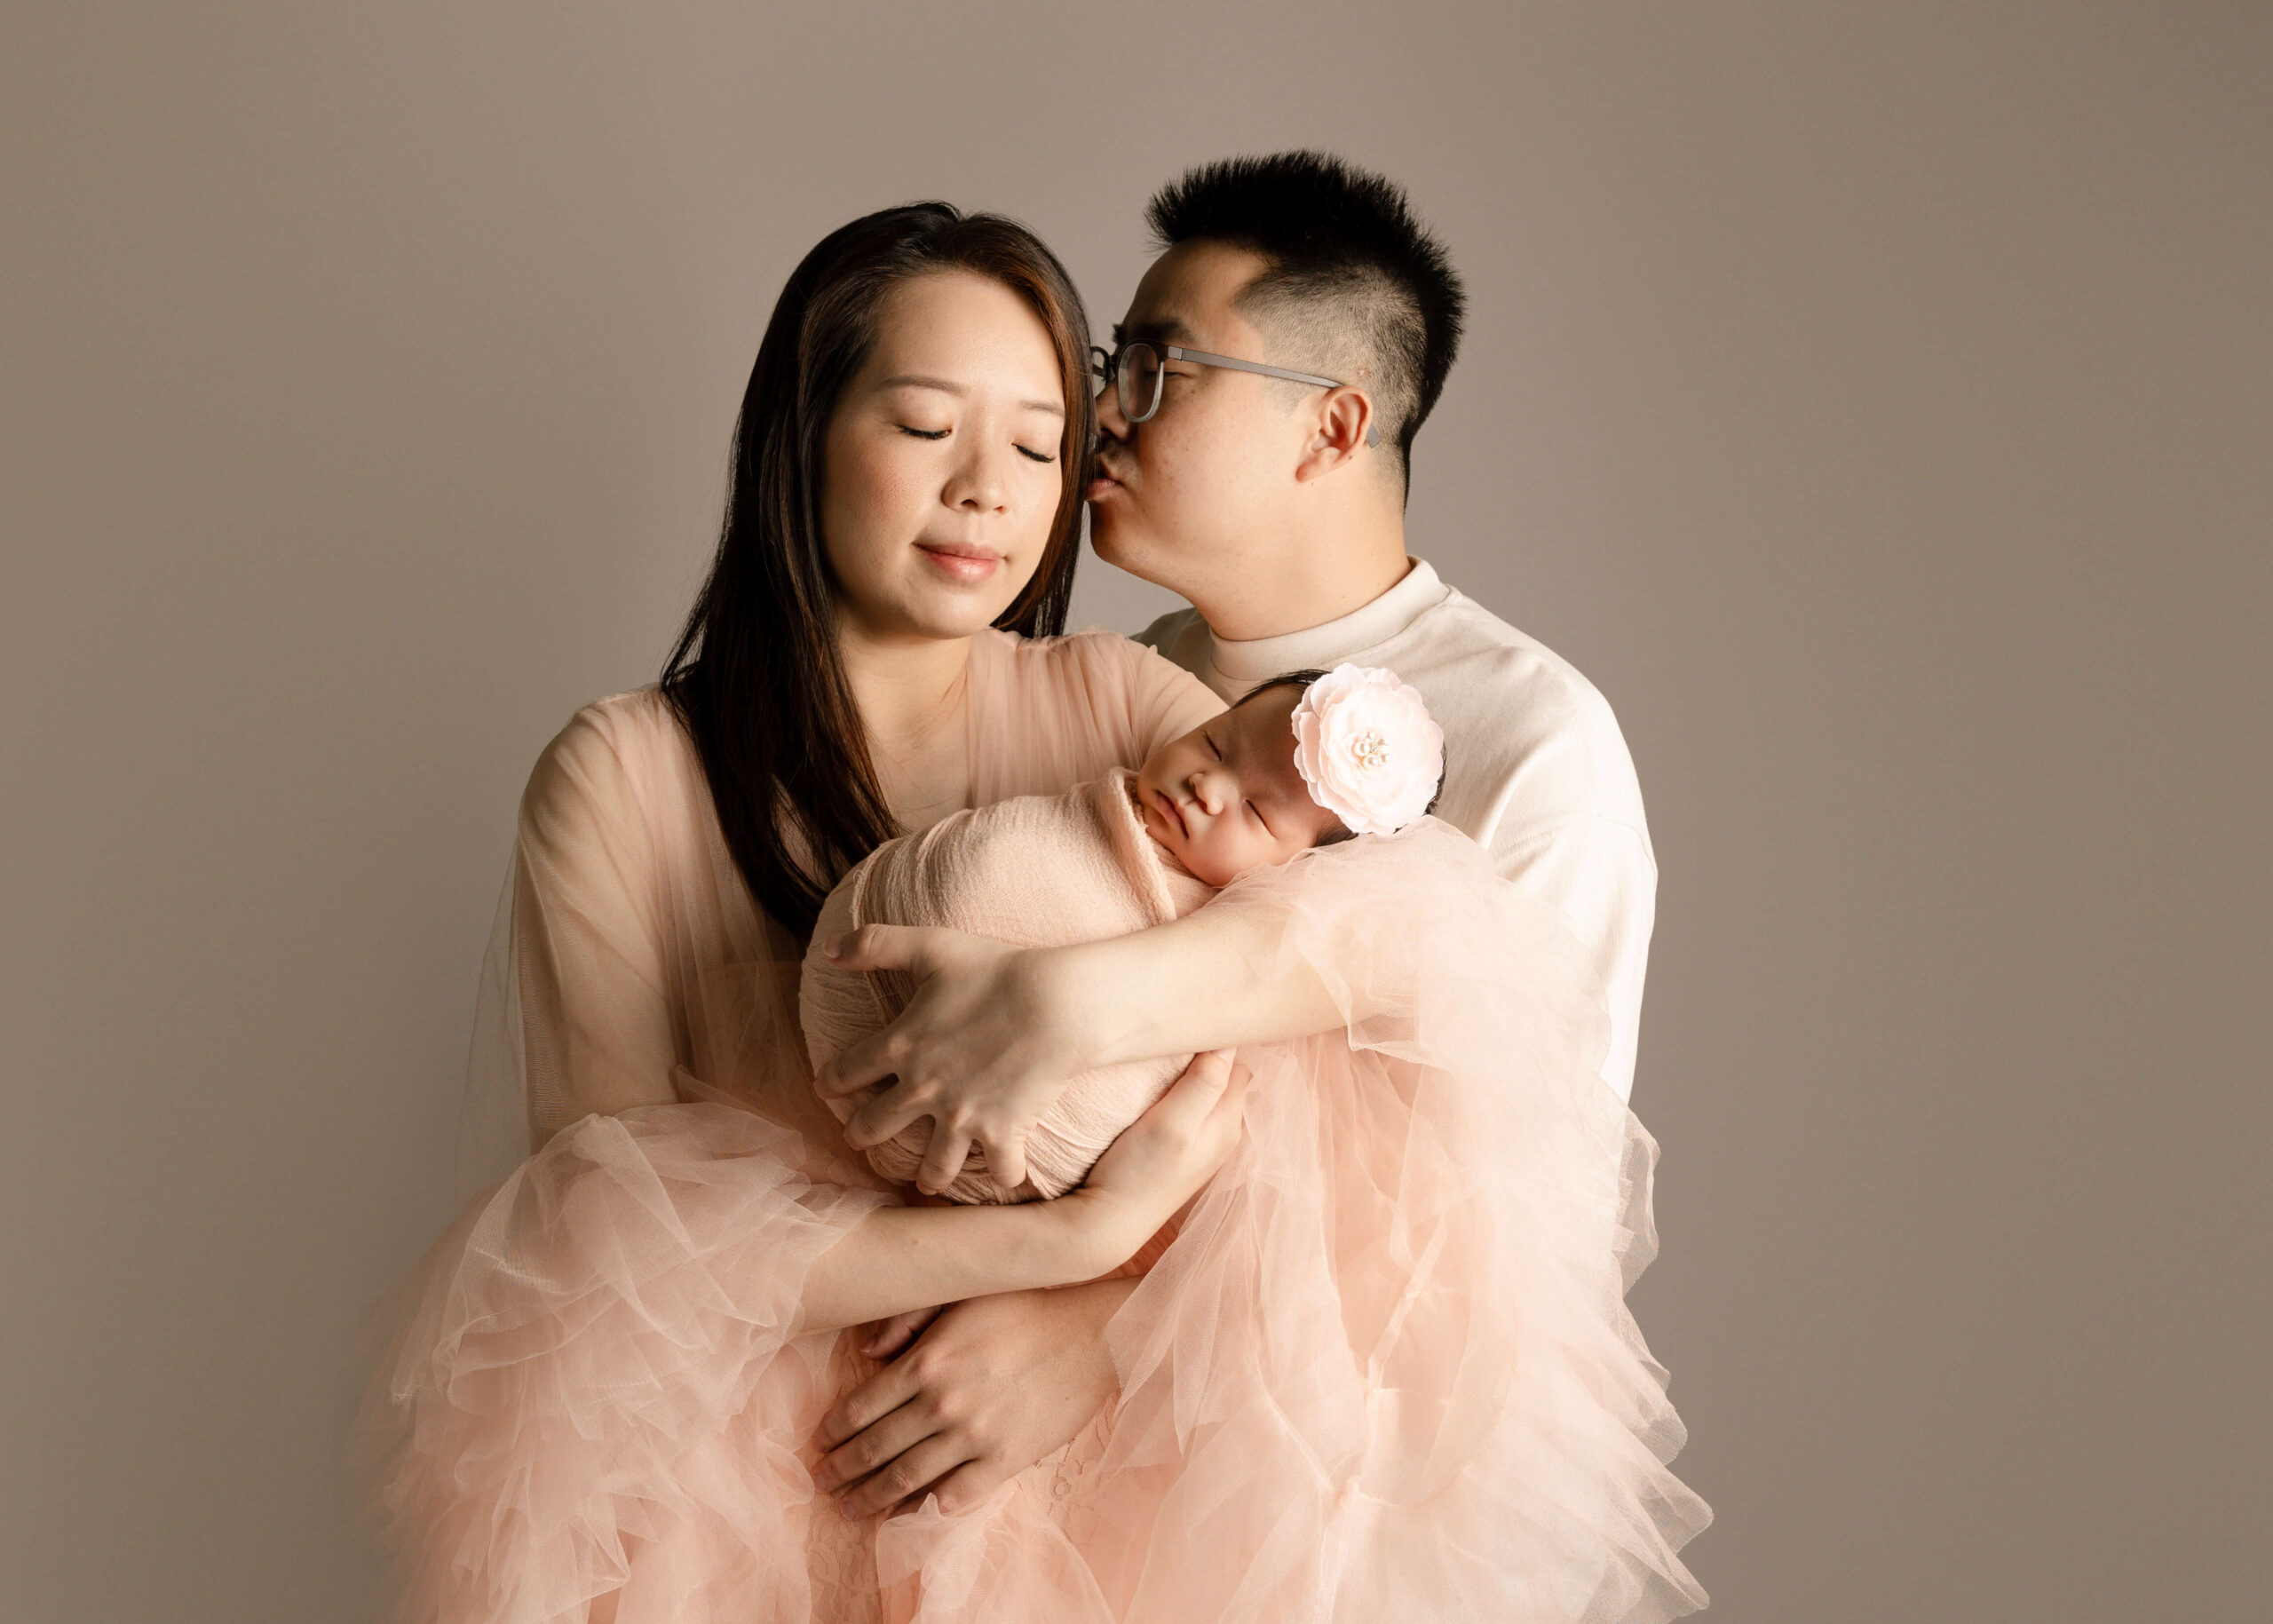 Husband kissing side of wife's face while they are embraced, and wife is holding their new baby girl. In studio in Los Angeles by Ashley Nicole.